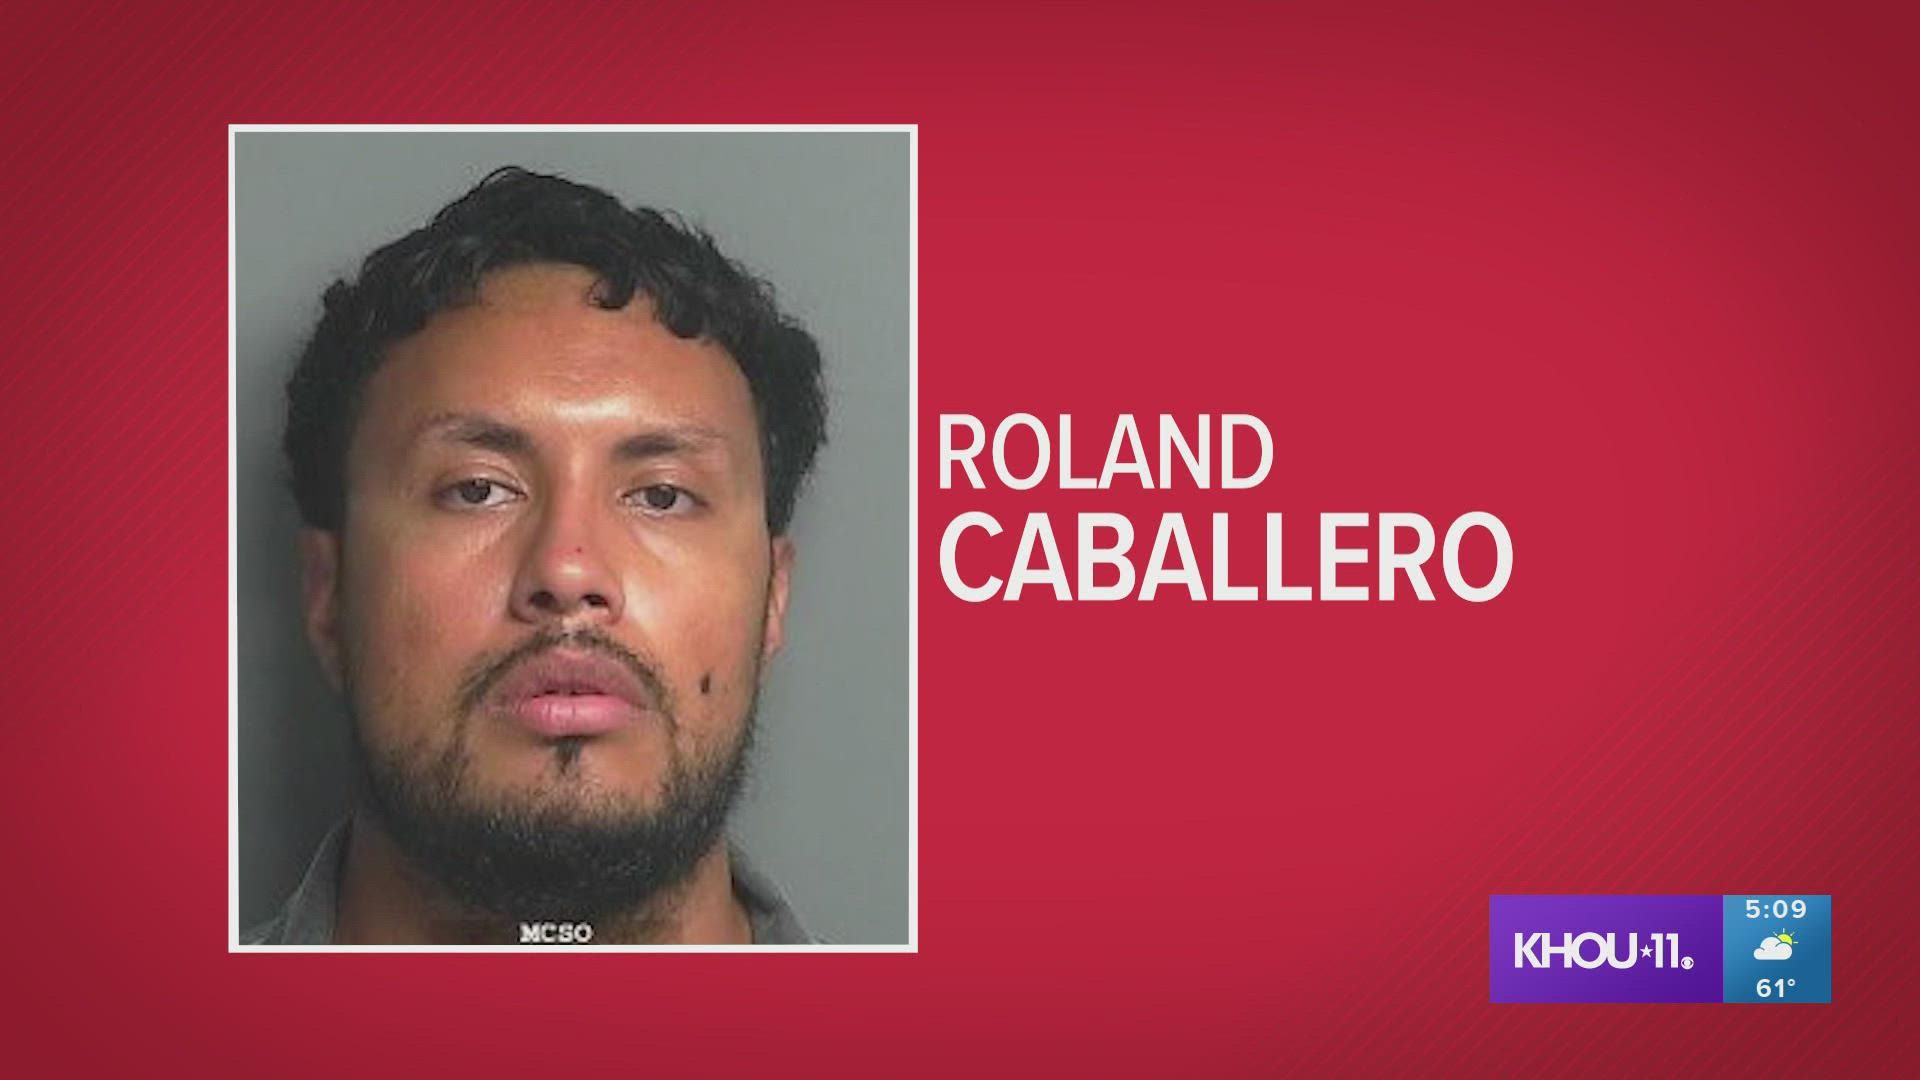 The officers were shot near the Third Ward after a chase. Police are now in a standoff with the suspect -- identified as Roland Caballero -- in the Fifth Ward.